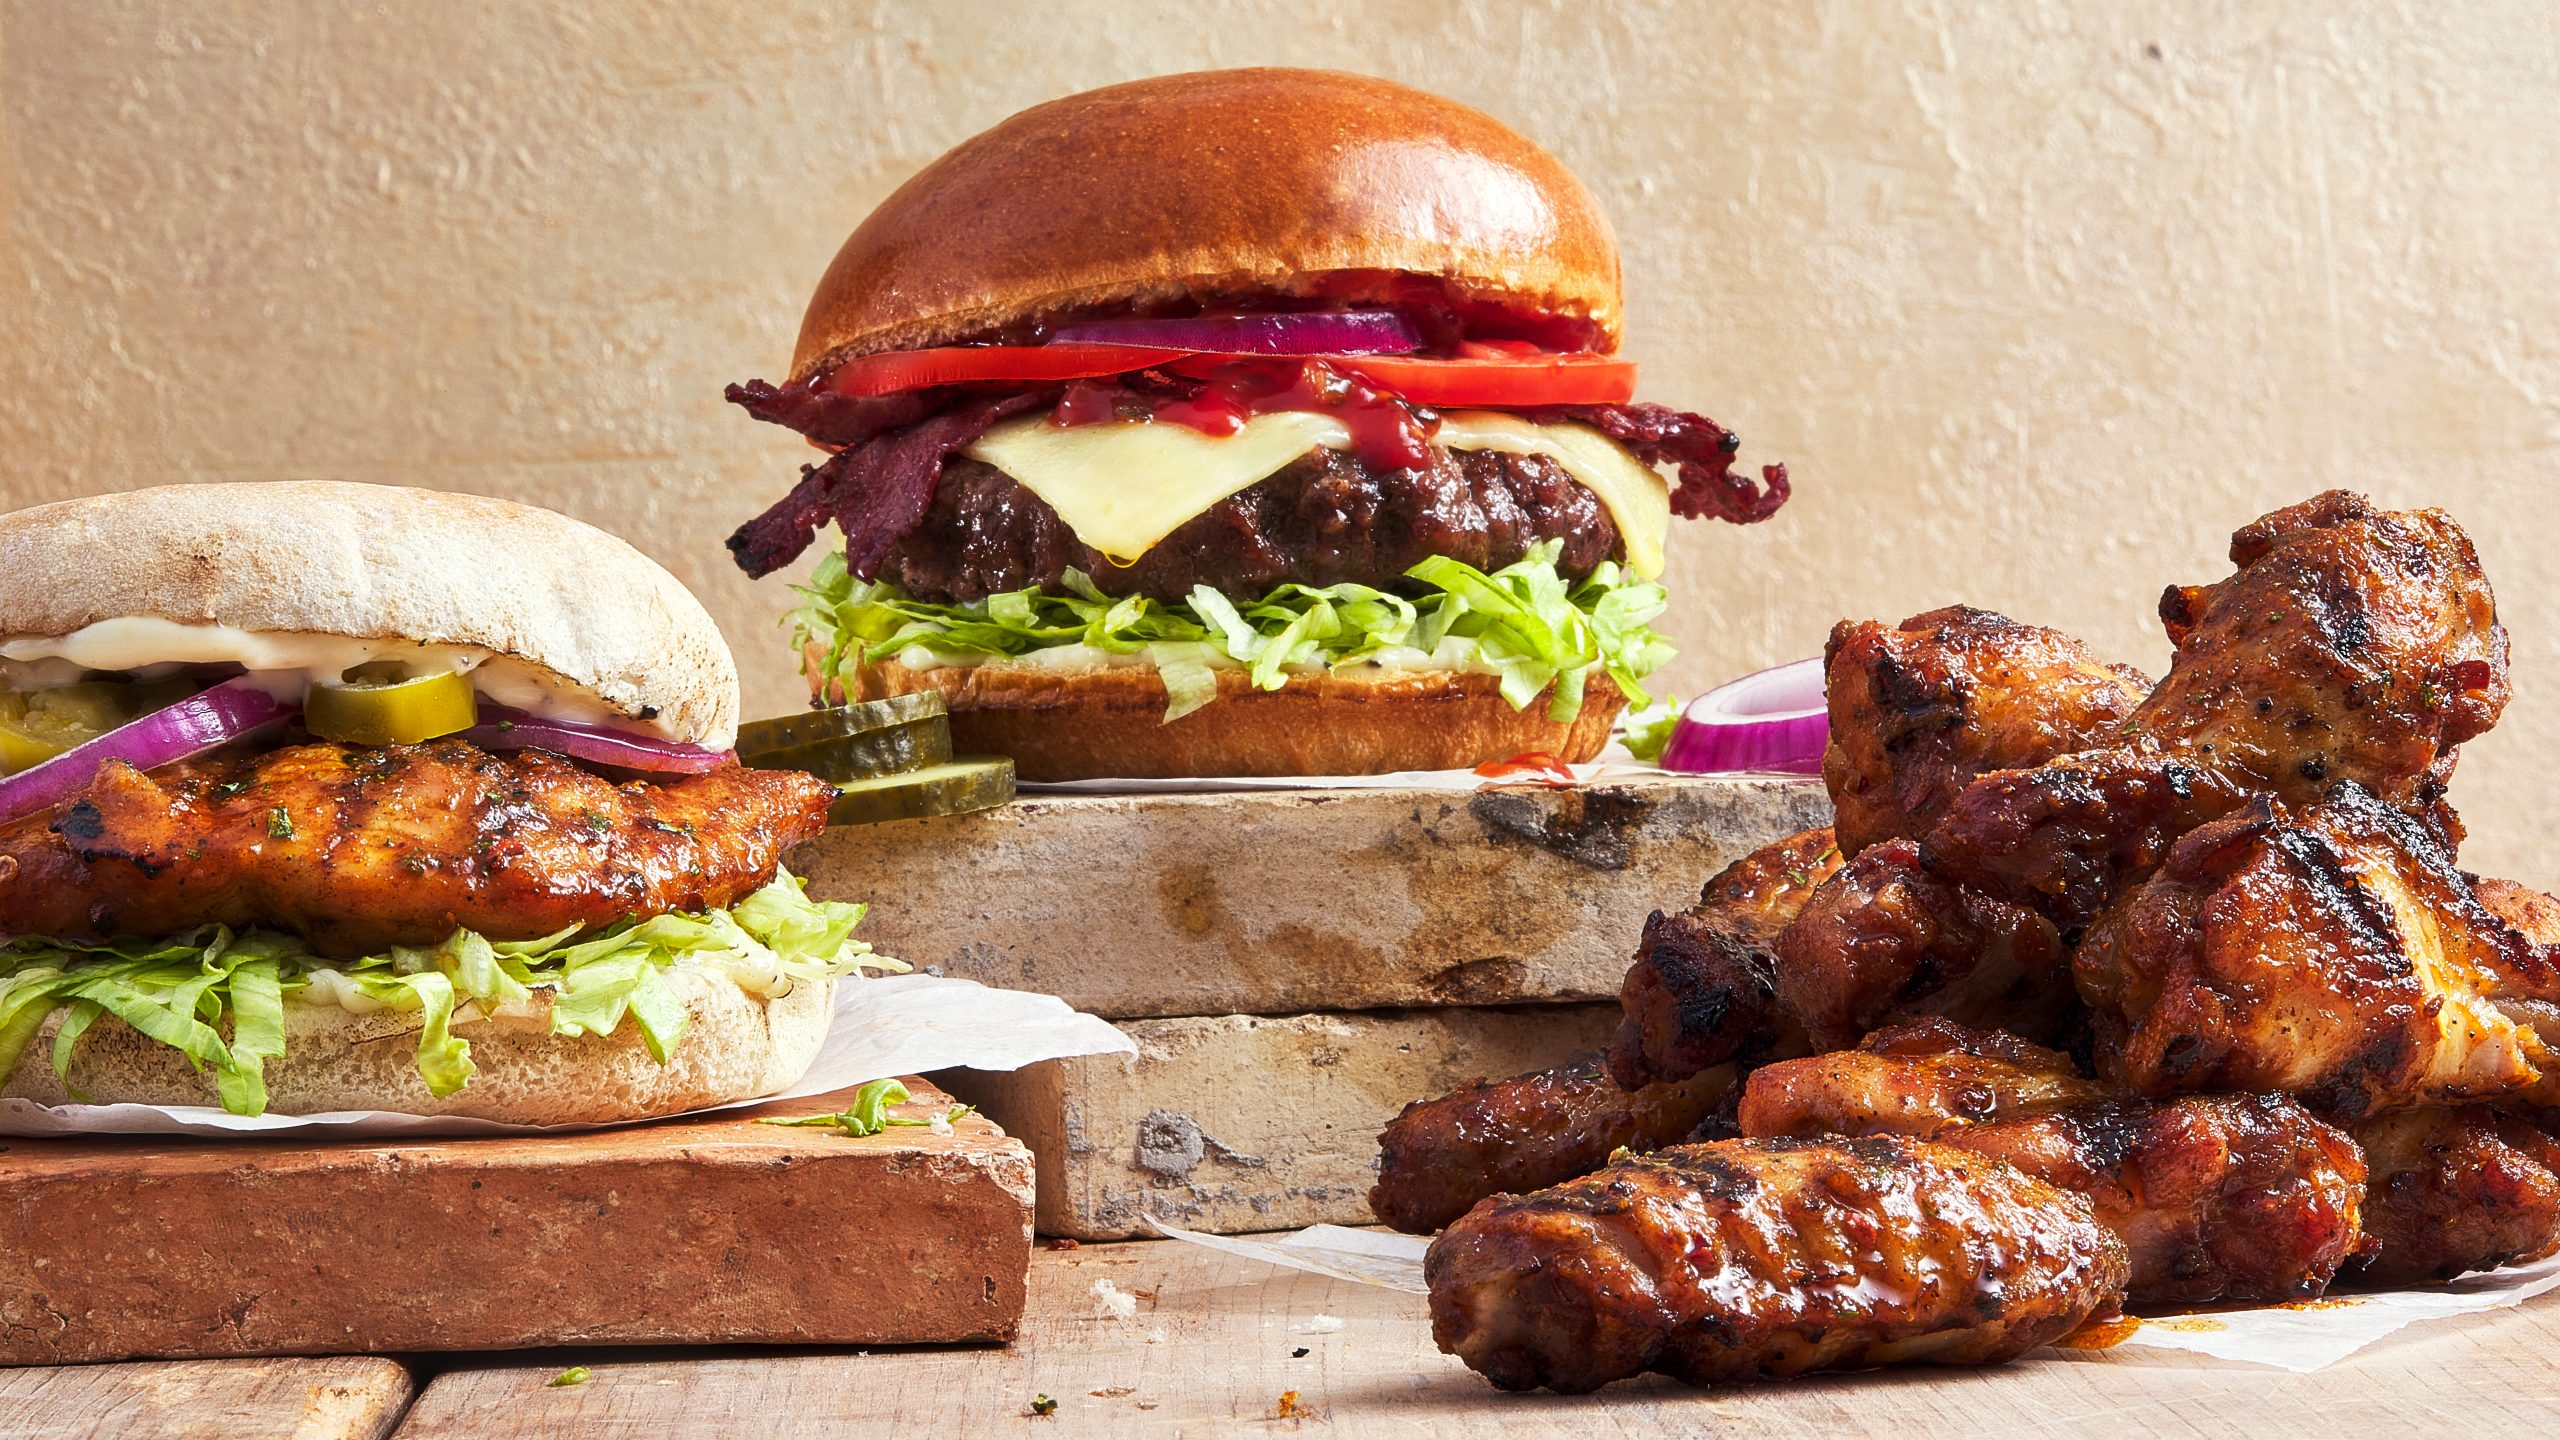 Mouthwatering burgers and chicken wings on rustic background.